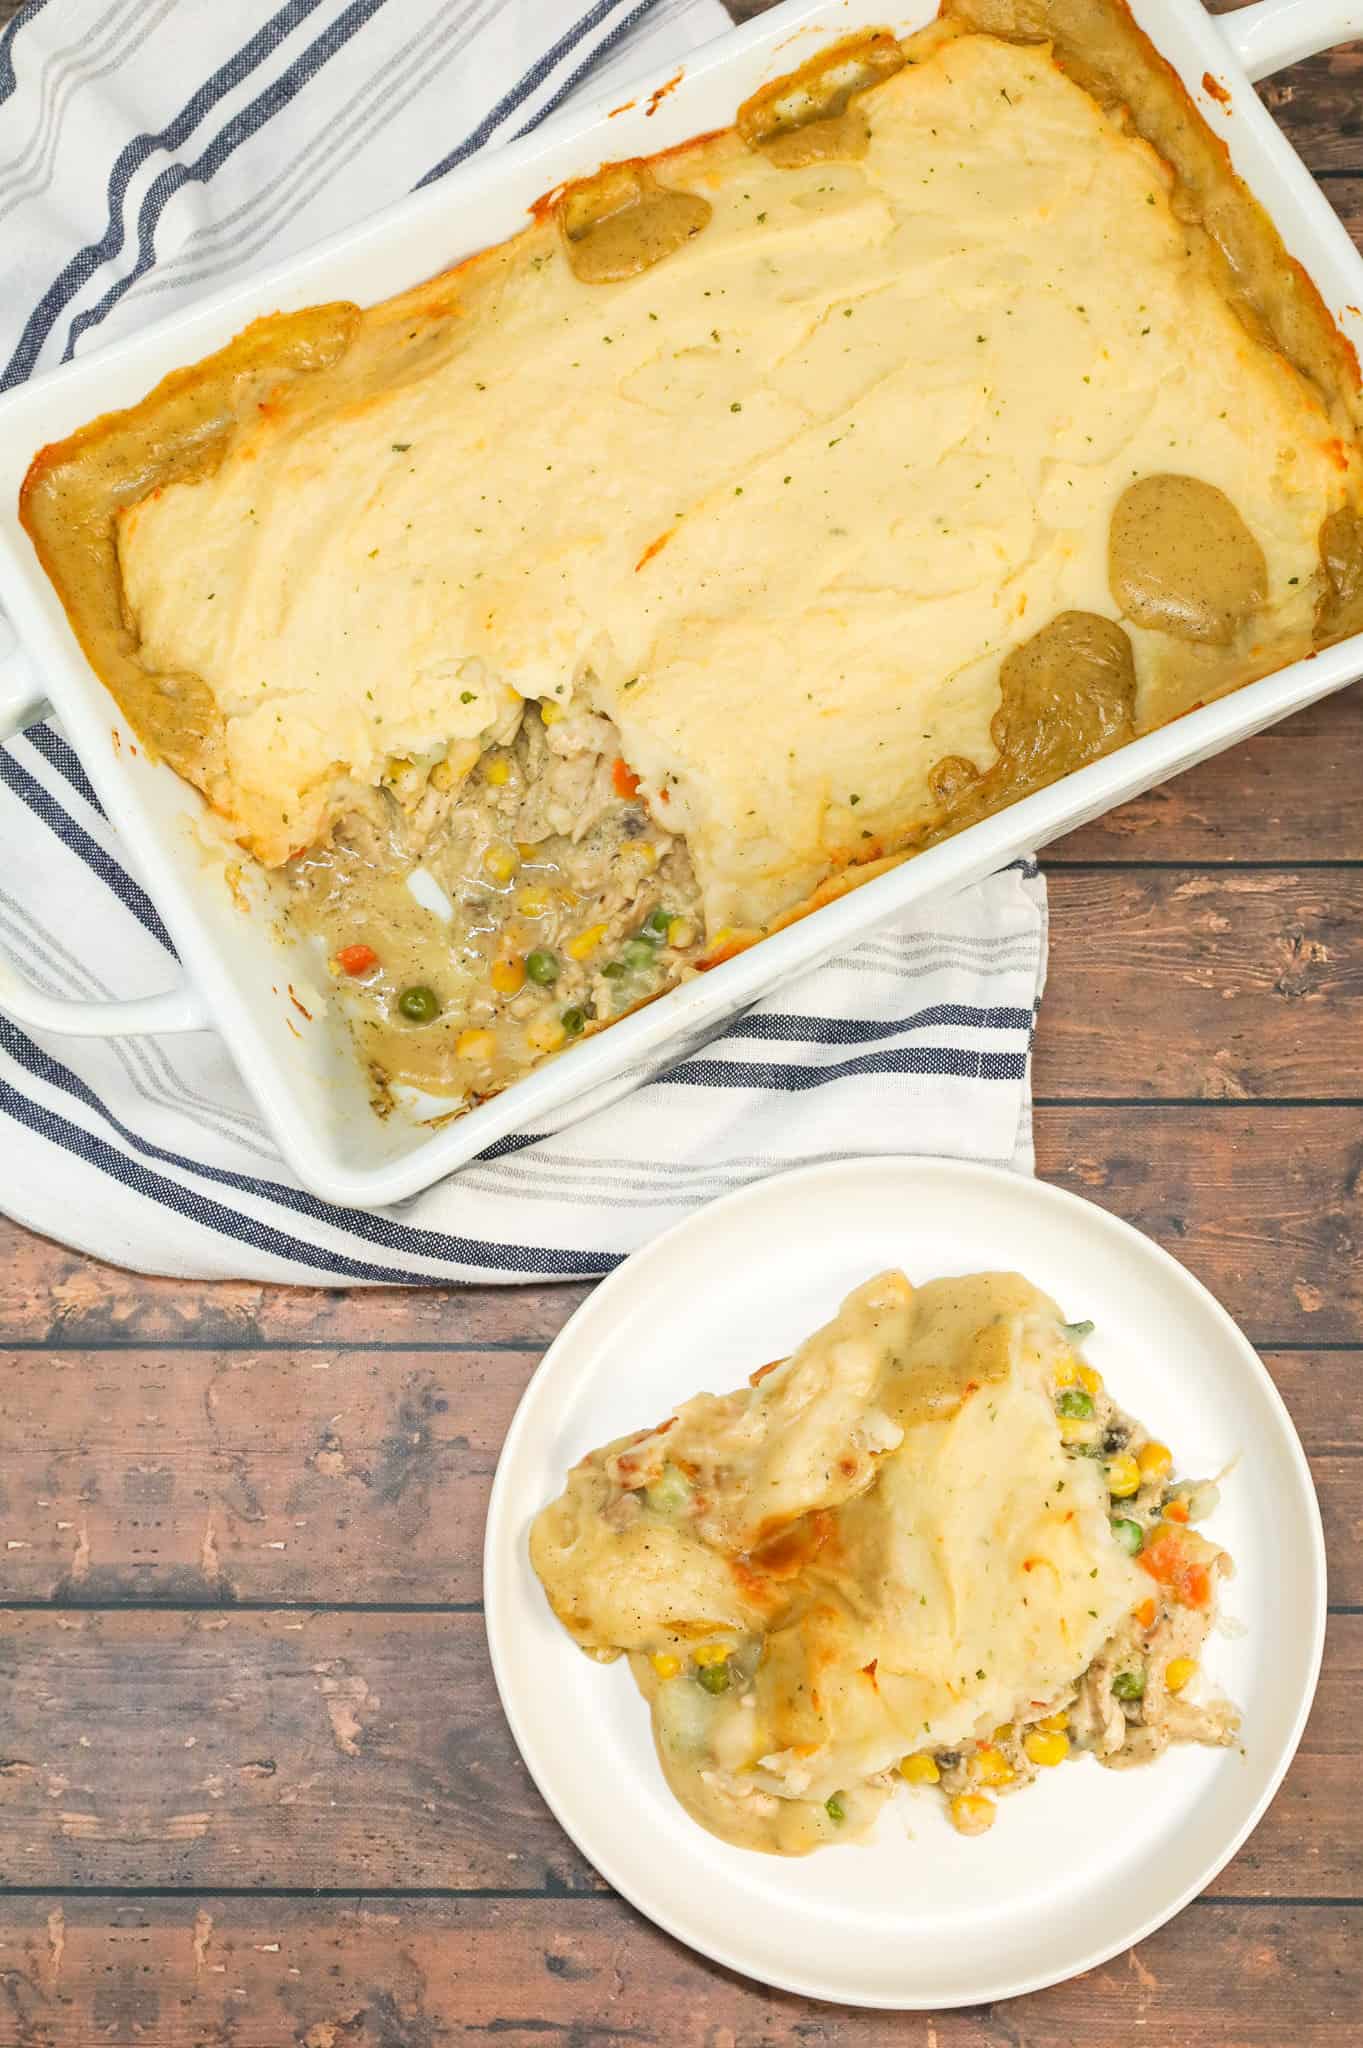 Chicken Shepherd's Pie is an easy dinner recipe loaded with shredded rotisserie chicken, mixed veggies, cream of mushroom soup and cream of chicken soup all baked with a layer of instant mashed potatoes on top.